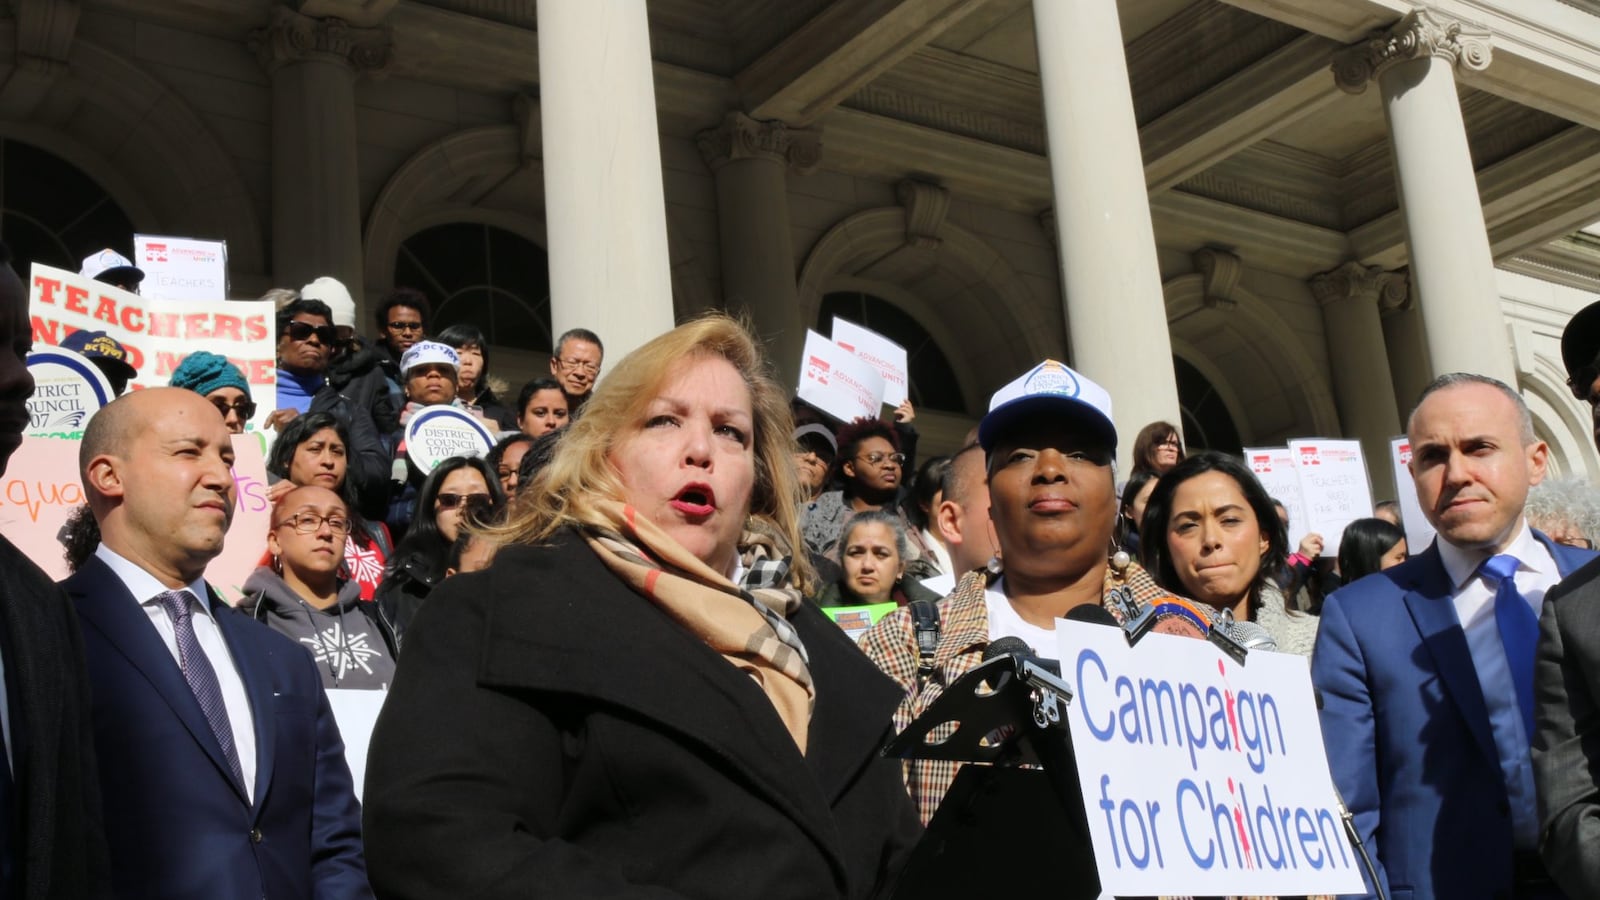 Kim Medina, the head of District Council 1707, speaks at a rally in March at City Hall to demand that pre-K teachers in community organizations are paid equally to education department teachers.